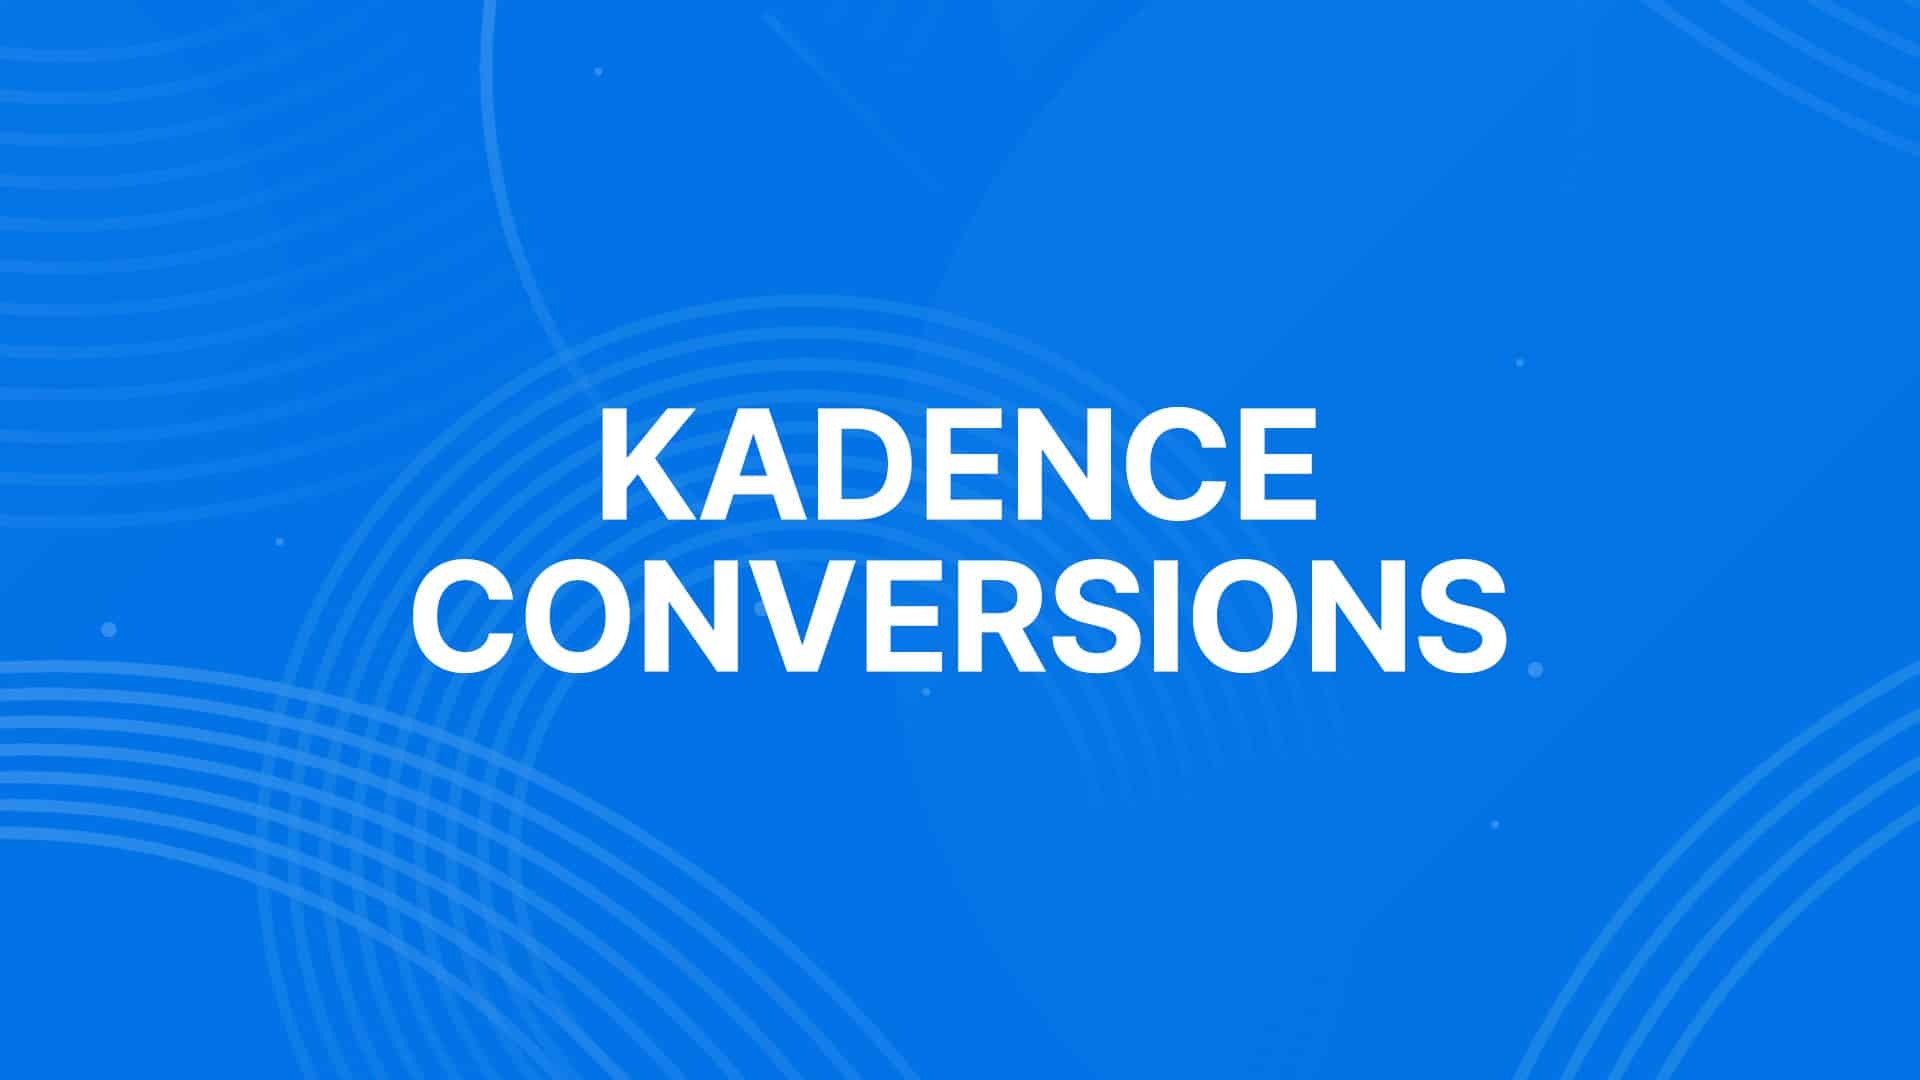 Kadence Conversions Popups, slide-ins Addon - Kadence Conversions - Popups, slide-ins Addon v1.1.0 by Kadencewp Nulled Free Download